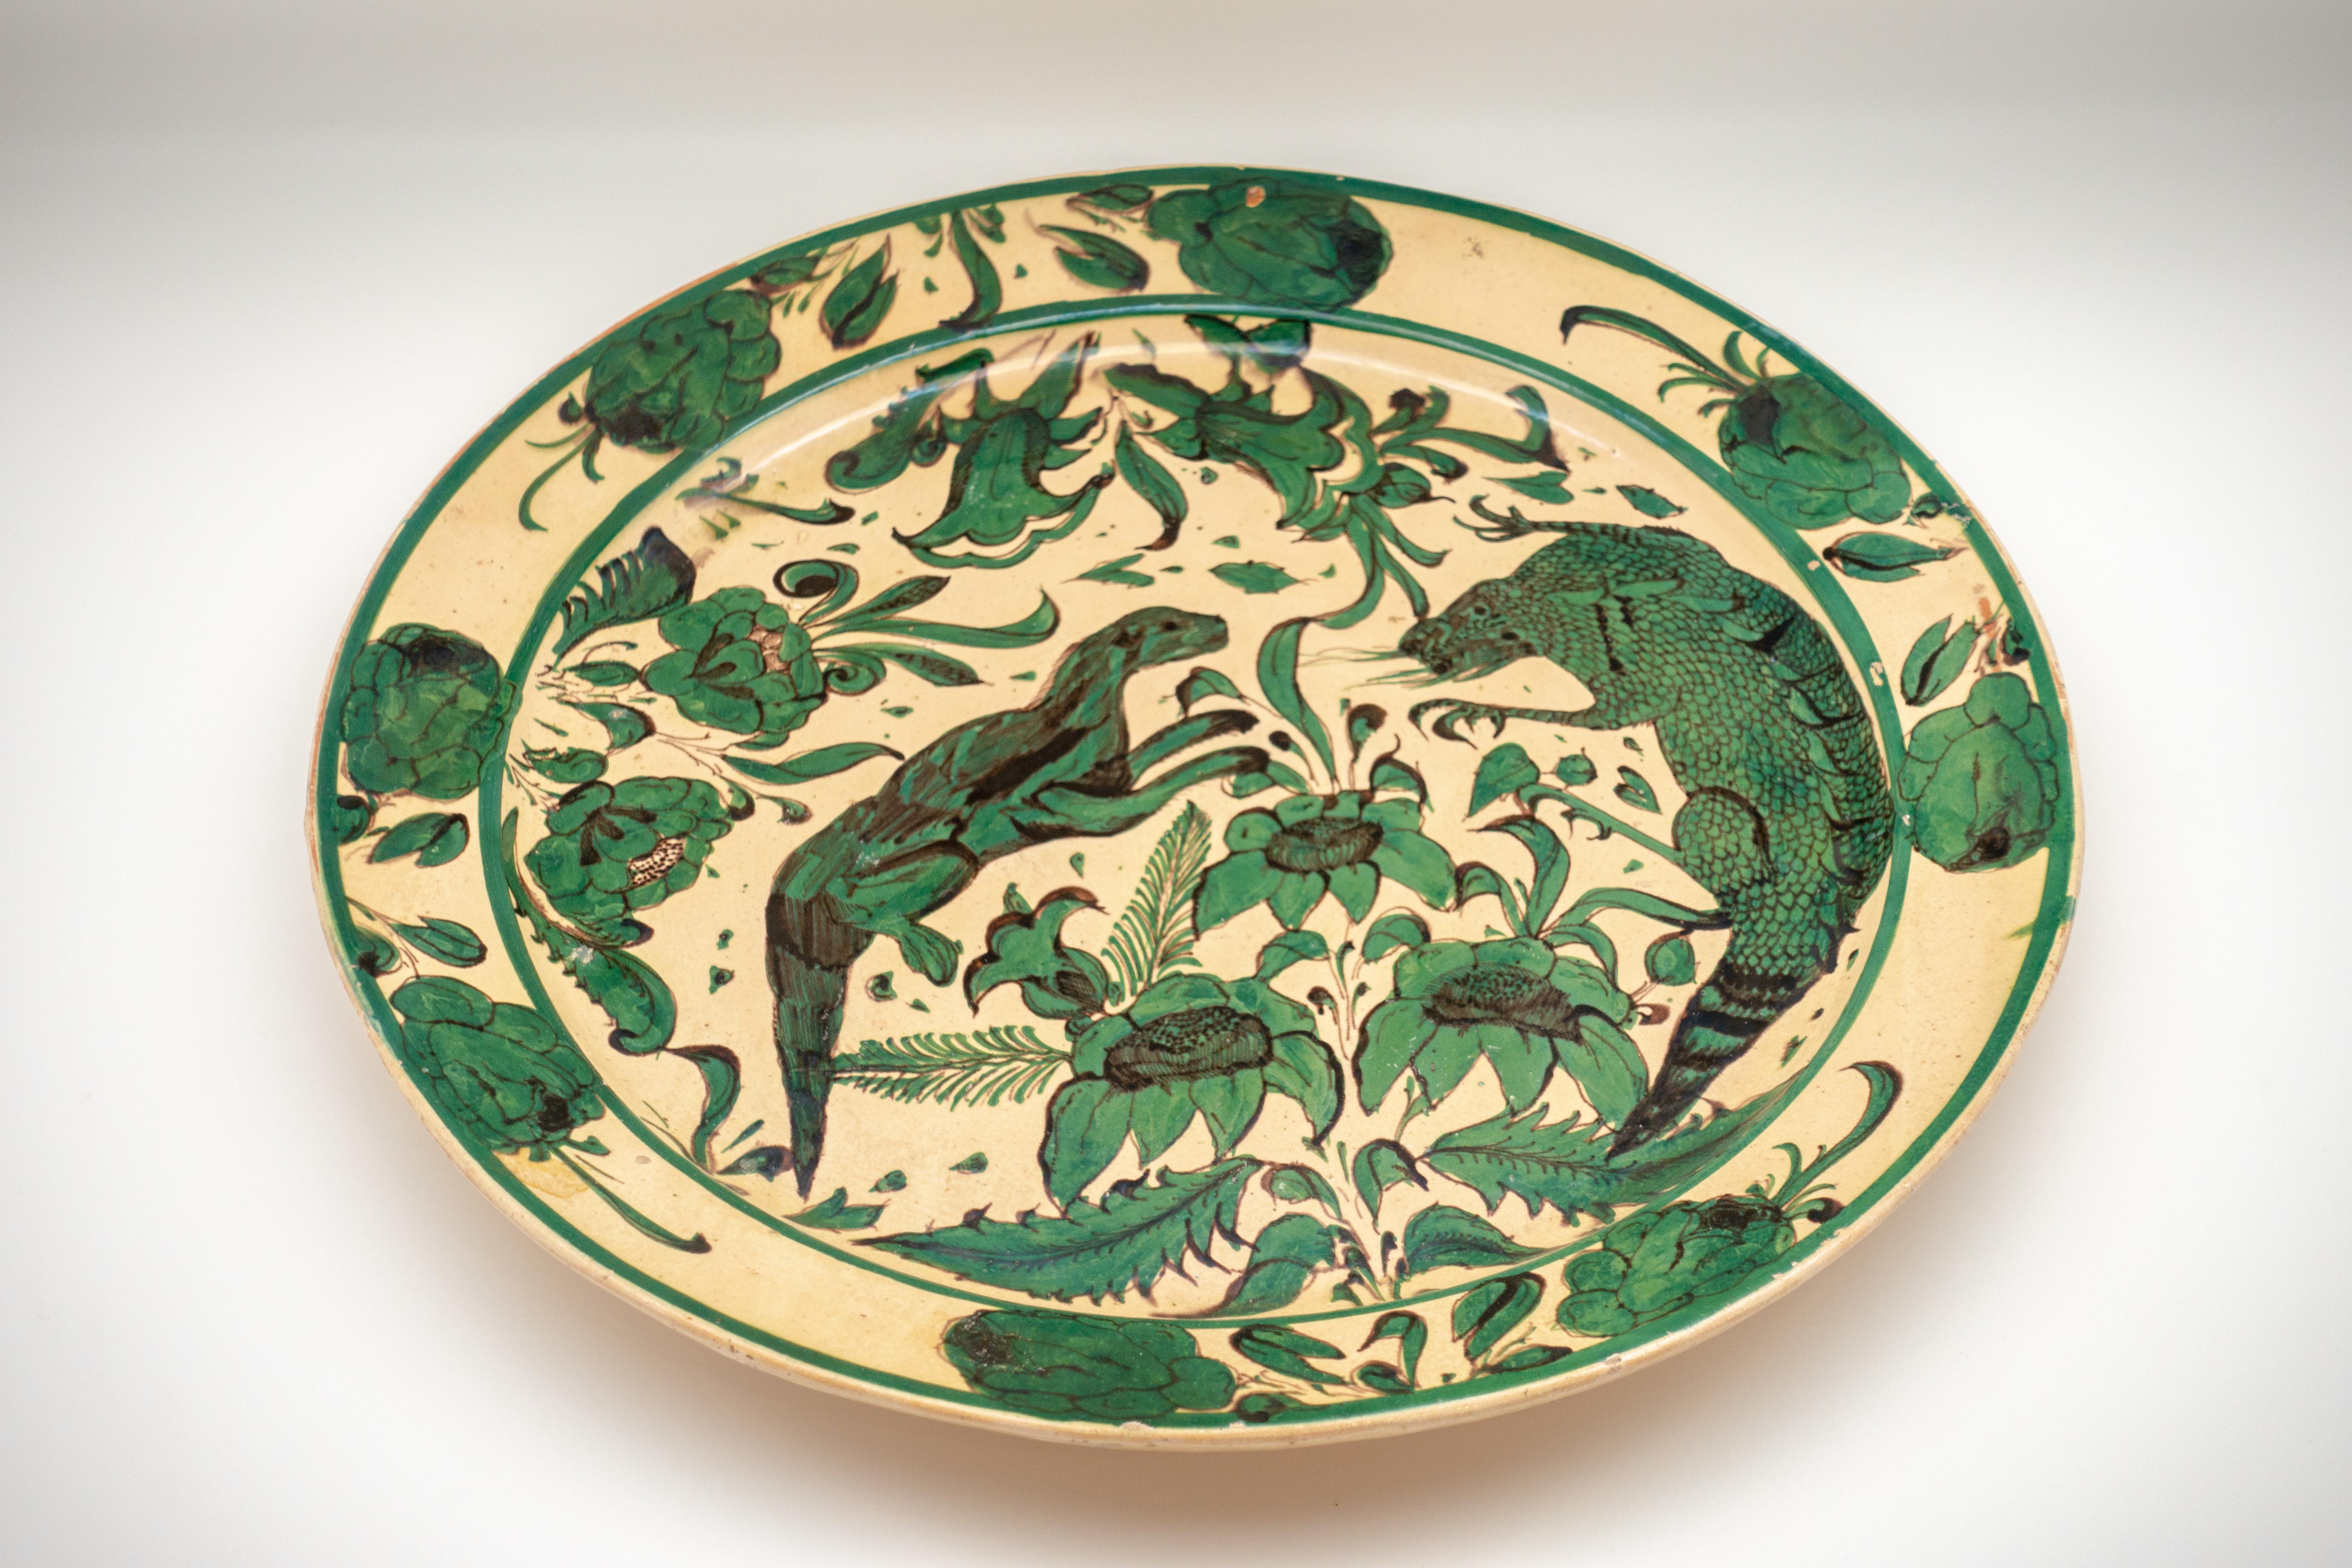 Vivid emerald green French faïence ceramic platter, circa 1850. Faïence is one of the oldest techniques used in ceramics; the discovery of faience in the ninth century and its diffusion in the West during the Renaissance allowed potters to begin to